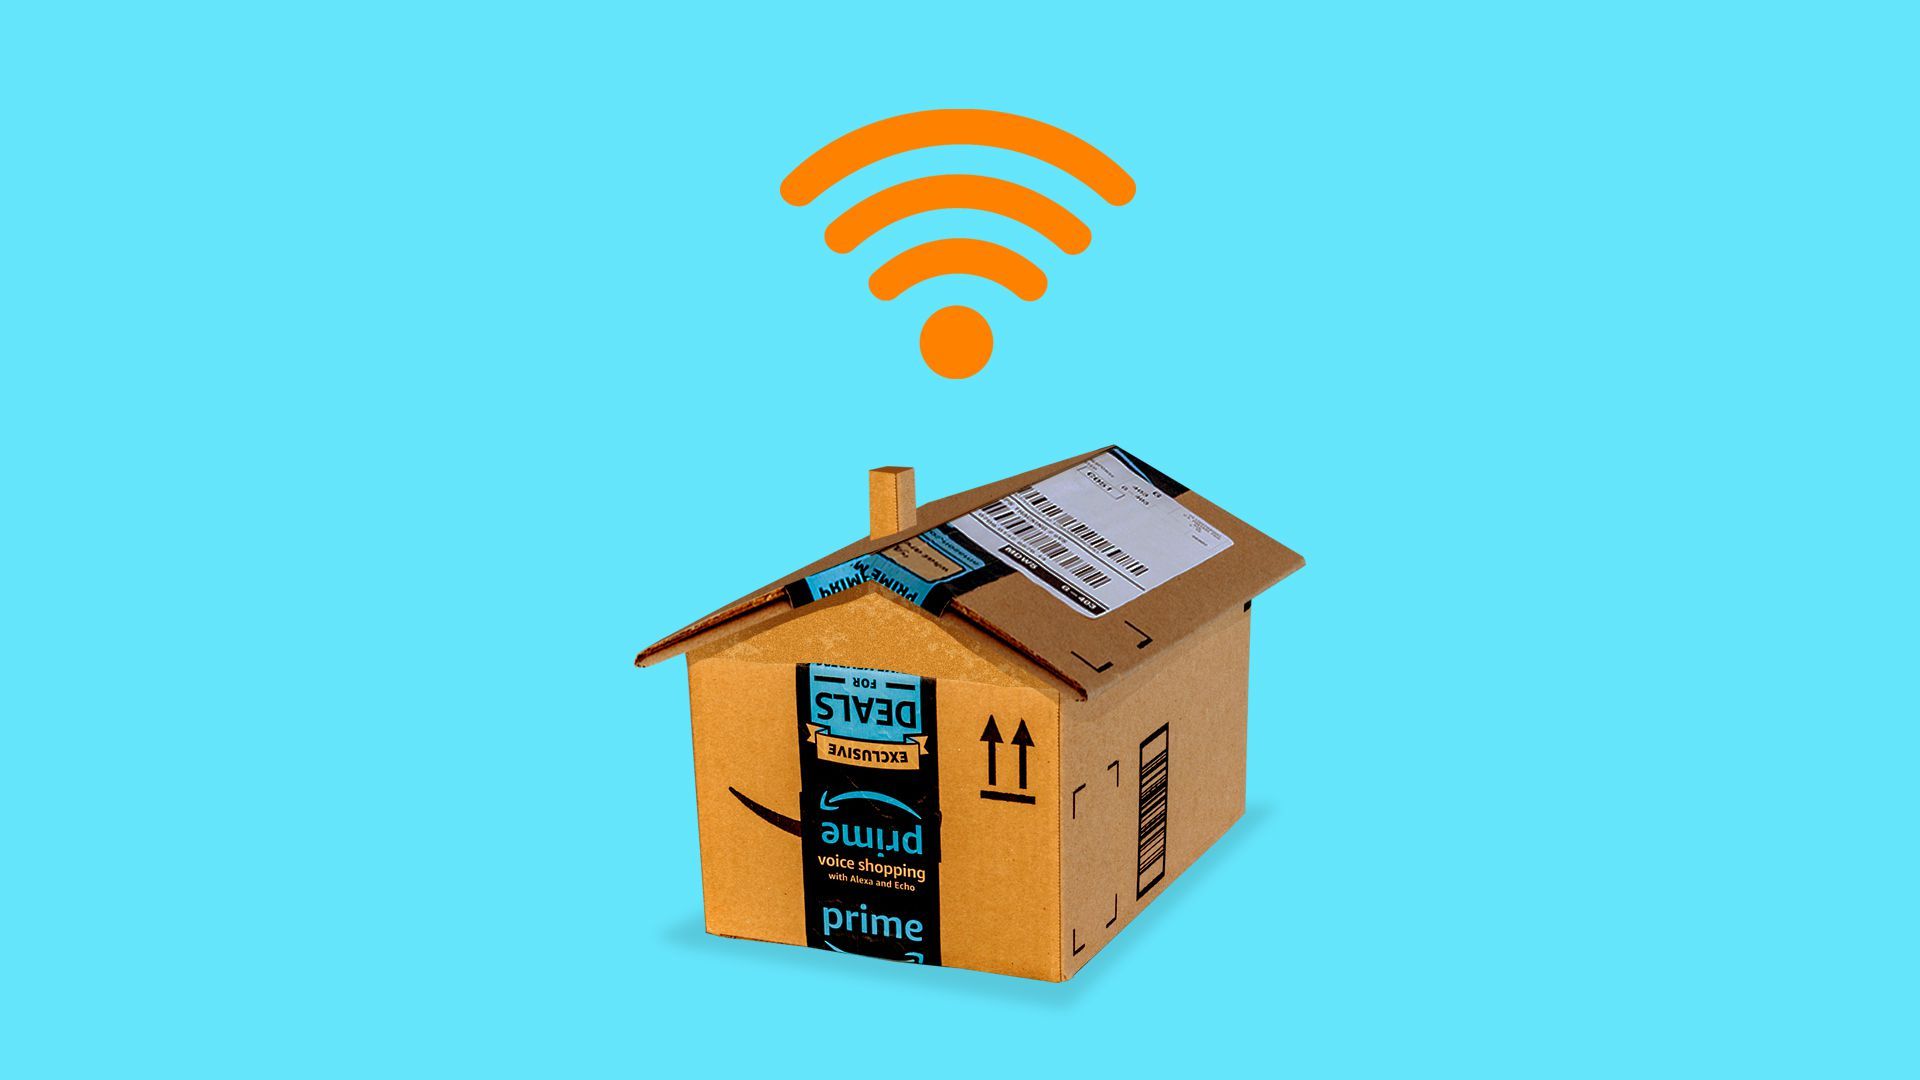 In this picture, a deconstructed Amazon delivery box is shaped into a house, and wifi signals erupt from the top of the house. 